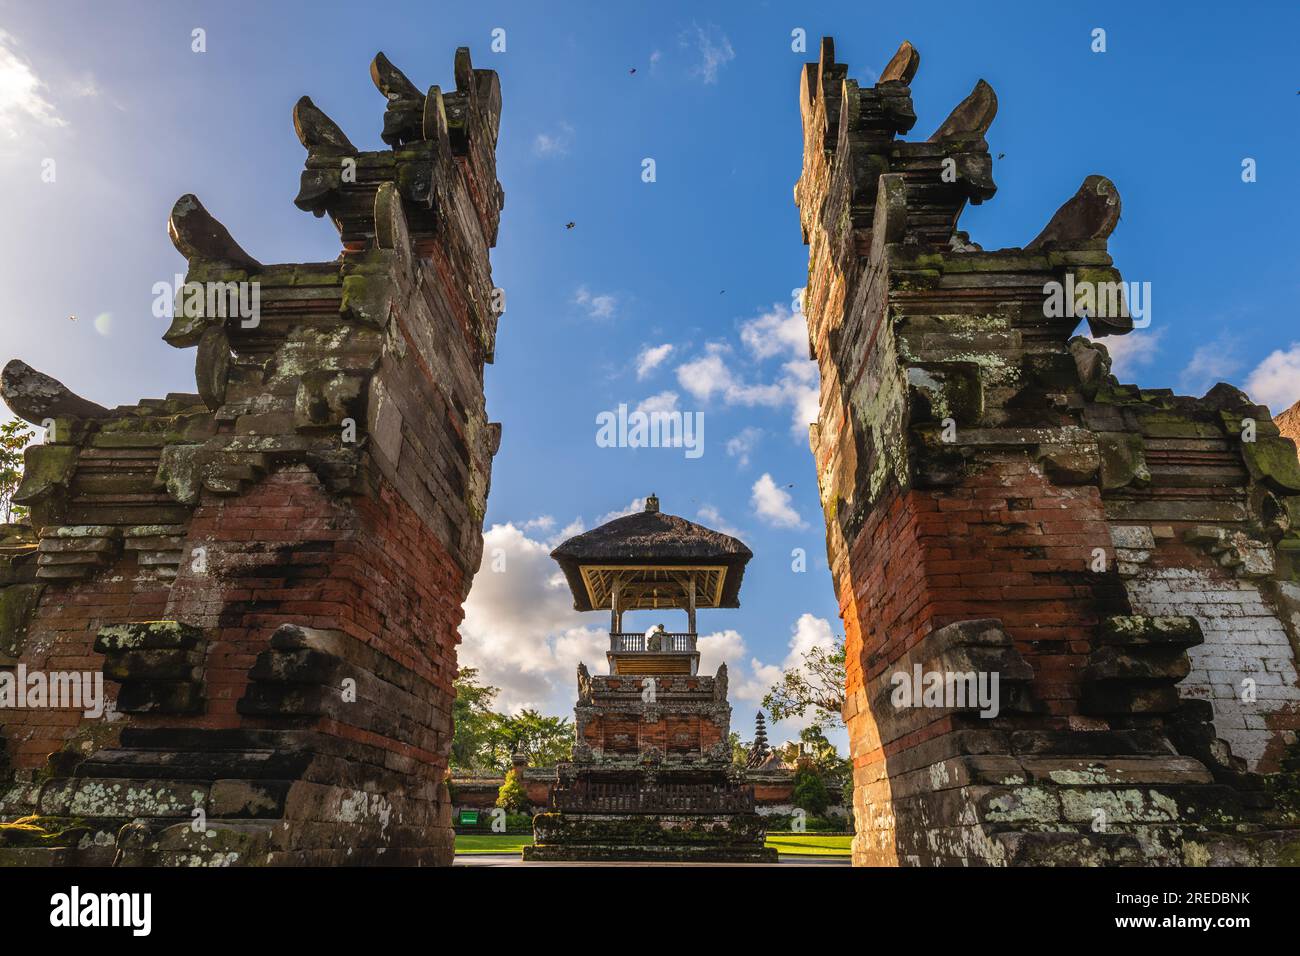 Pura Taman Ayun, a Balinese temple and garden in Mengwi subdistrict in Badung Regency, Bali, Indonesia. Stock Photo